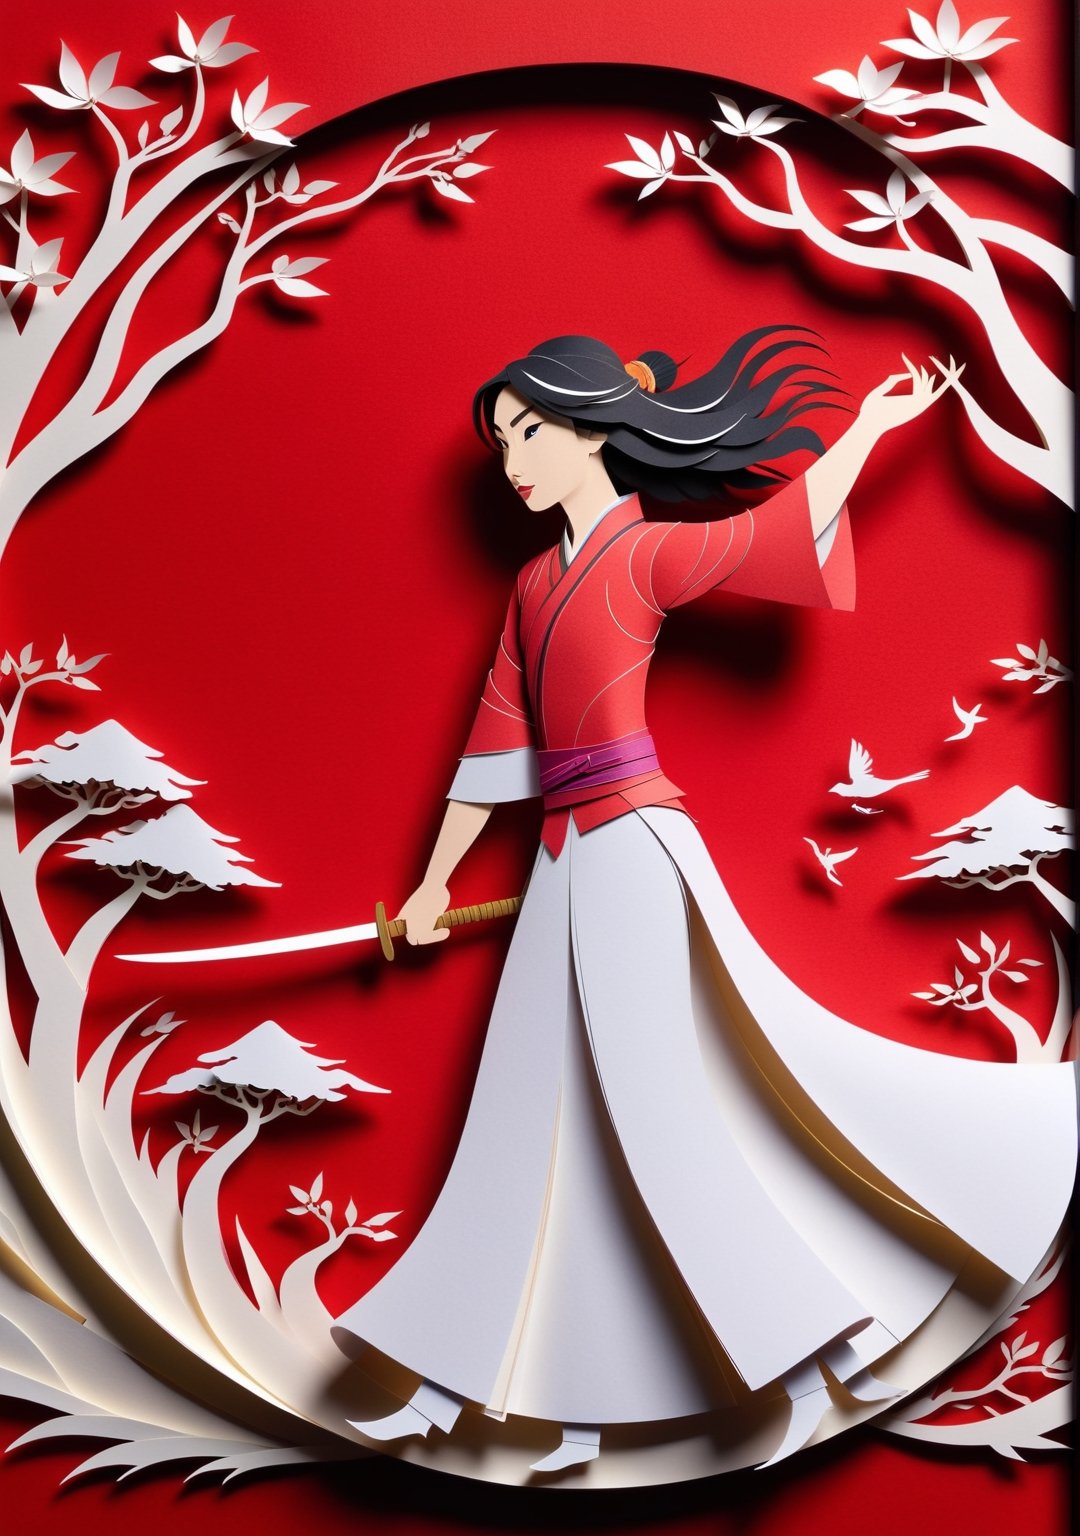 A mesmerizing paper-cut animation of the iconic tale of Mulan comes to life on the screen. Every delicate detail meticulously crafted out of paper unfolds before your eyes, showcasing the determined spirit of Mulan. The intricate paper scenes blend vibrant colors with the ancient art of papercutting, capturing Mulan's courage and determination as she goes against societal expectations to protect her family and honor. This enchanting animation captivates viewers with its exquisite precision and awe-inspiring artistry, immersing them in the compelling story of Mulan's heroic journey. (((Paper cutting art style))), high detail, high quality, high resolution, dramatically captivating, detailmaster2,Movie Still